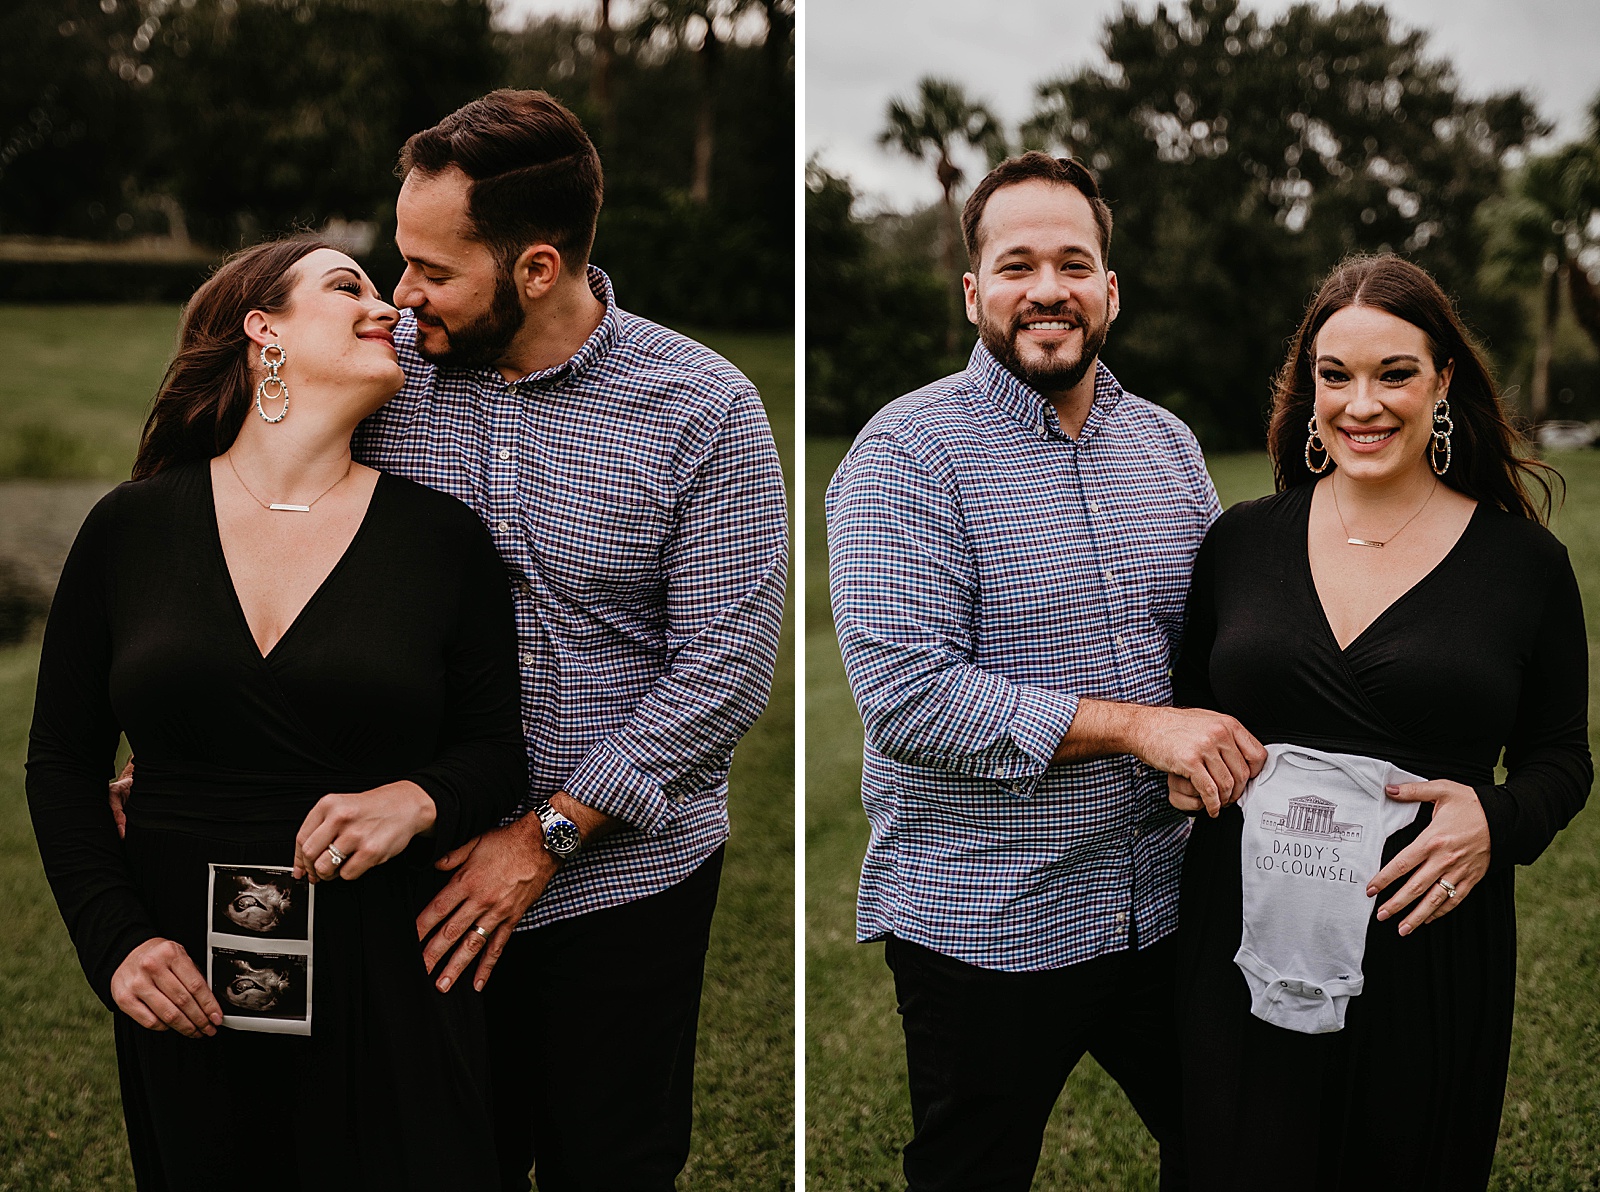 South Florida Gender Reveal Photos by South Florida Family Photographer Krystal Capone Photography